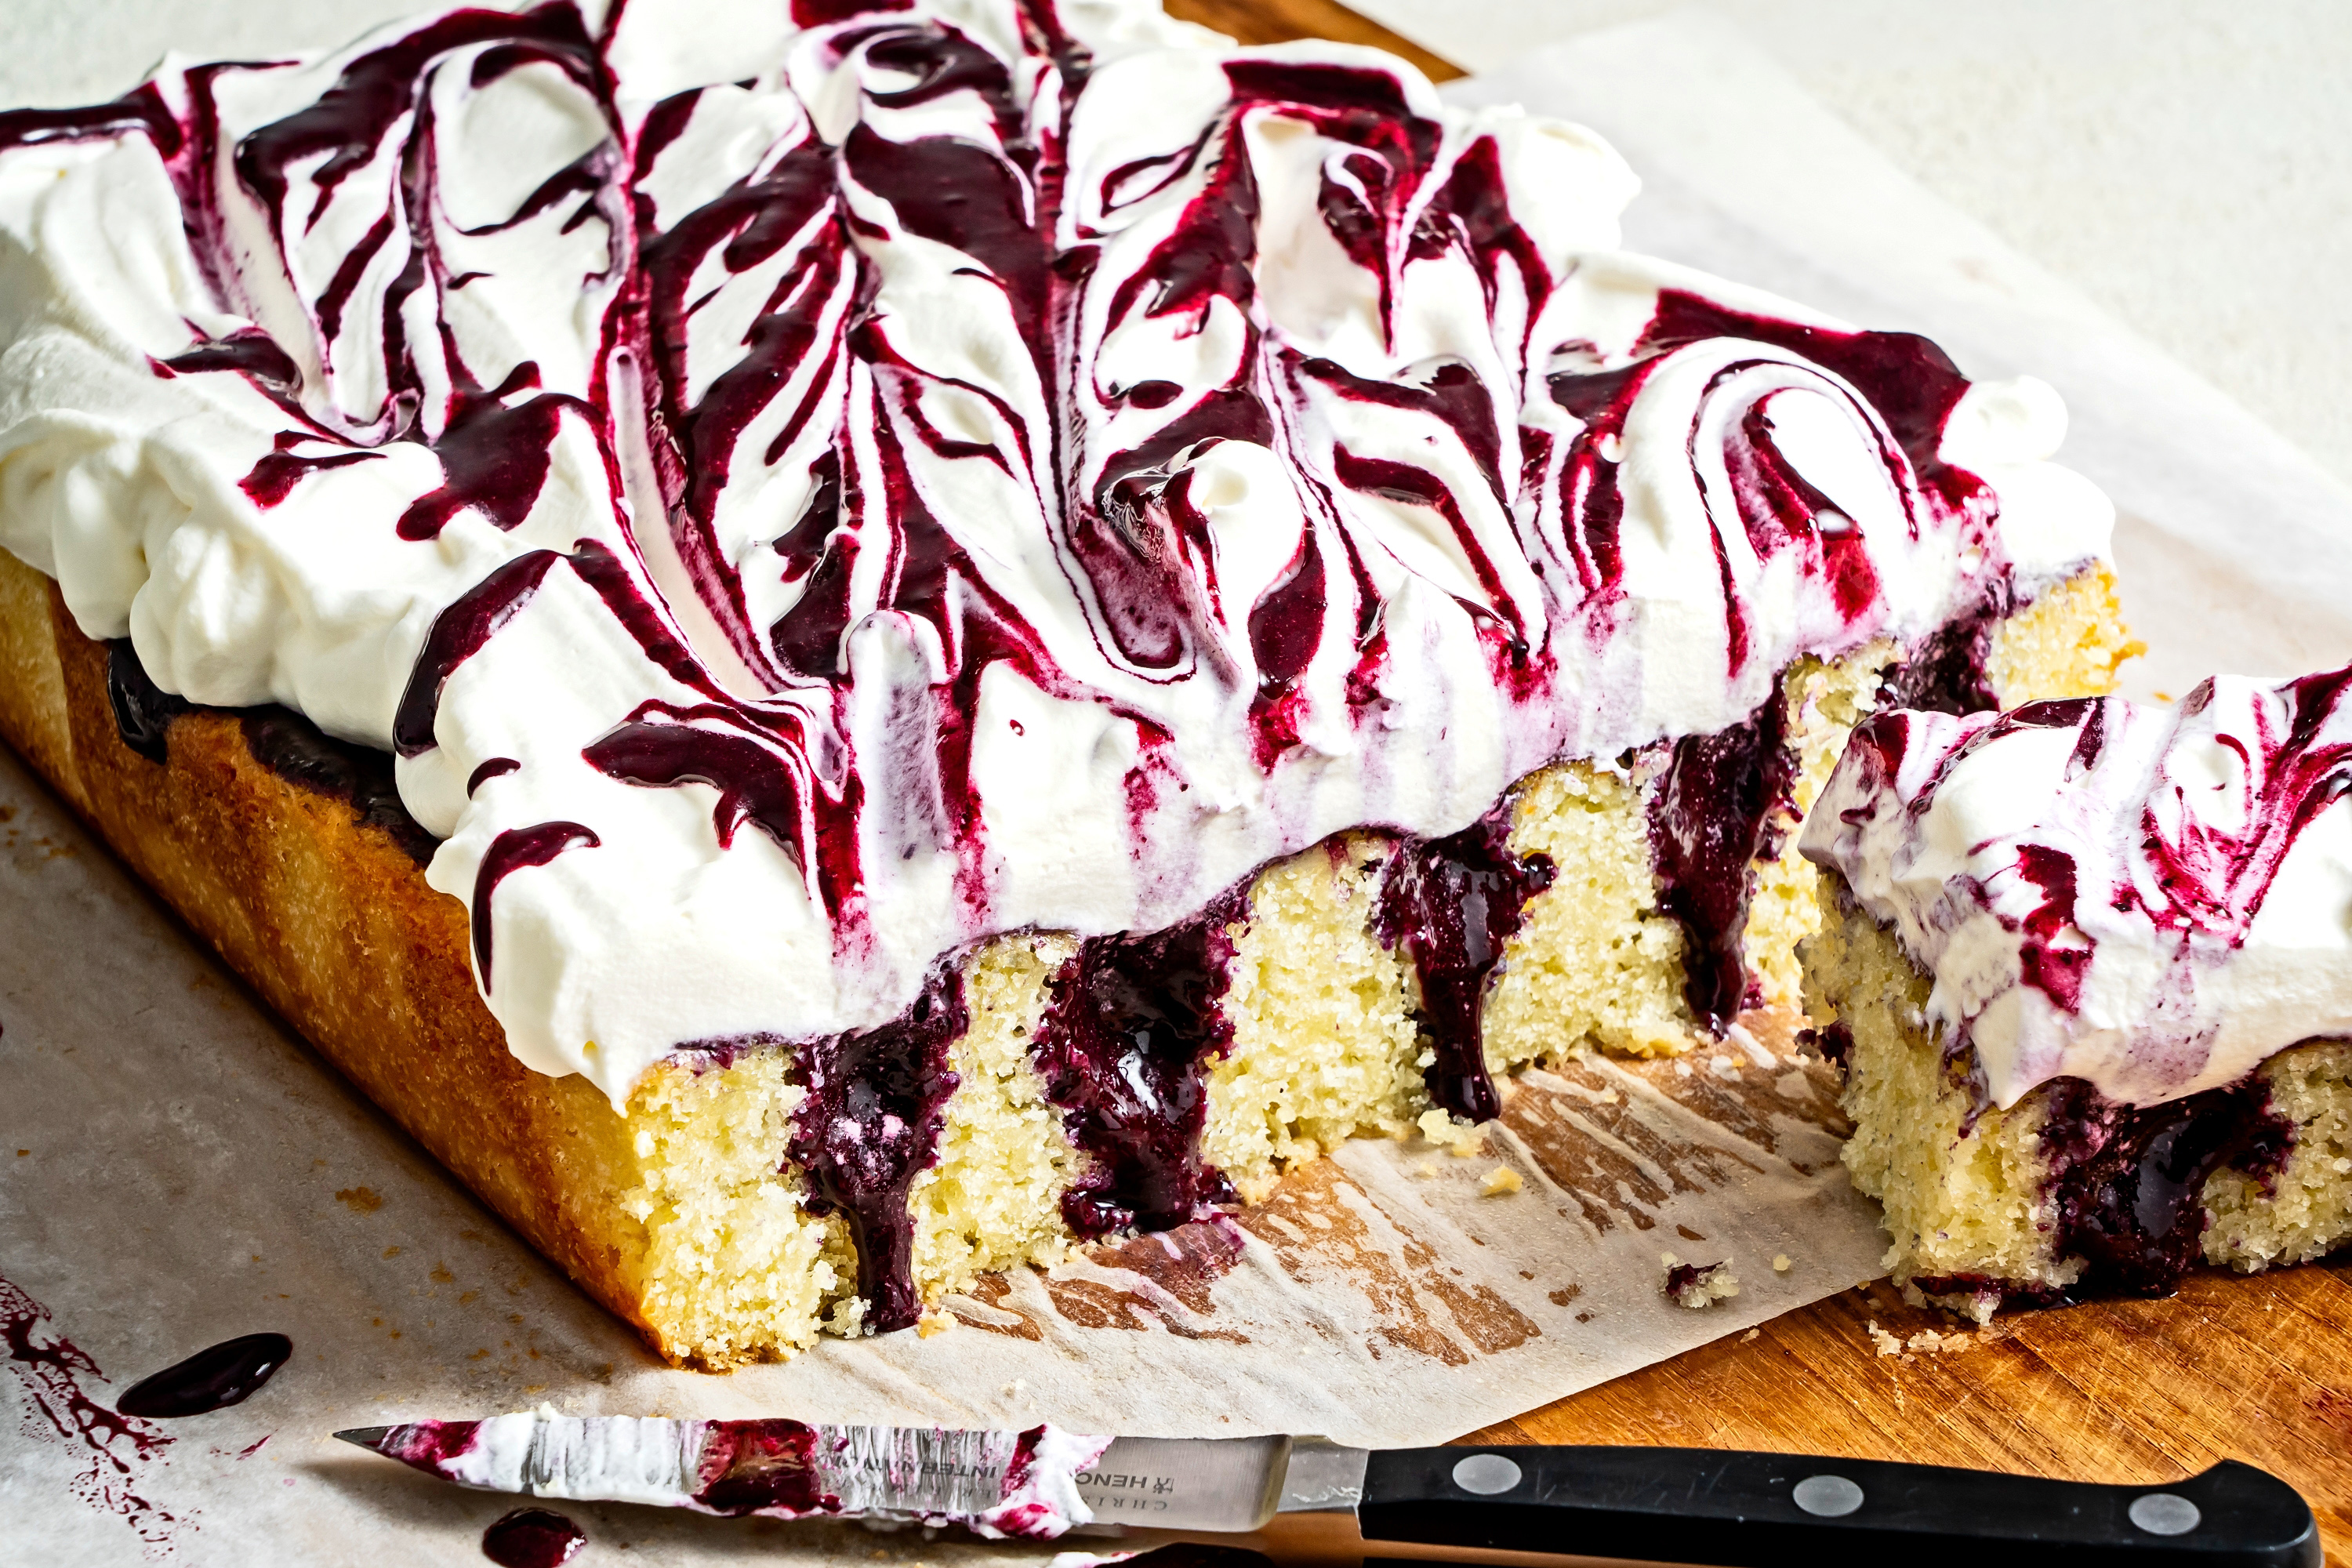 A from-scratch blueberry poke cake upgrades a retro classic
	
	